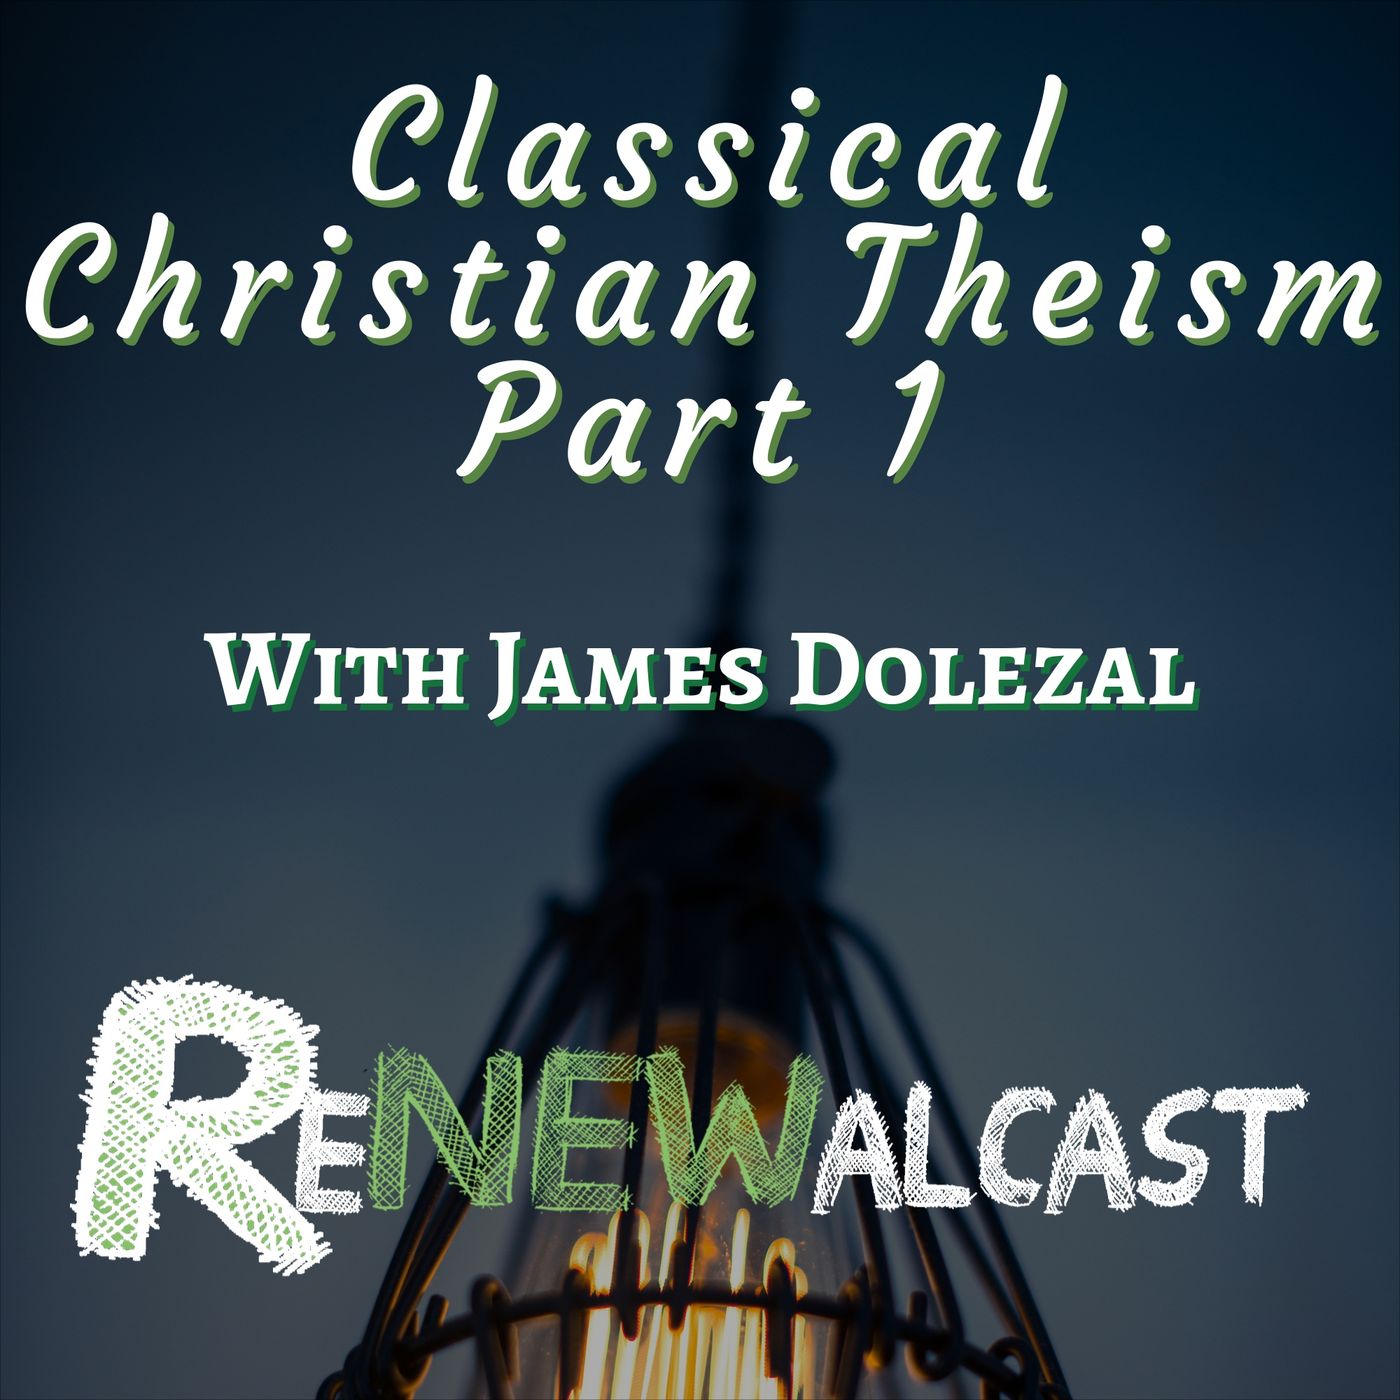 Classical Christian Theism Part 1 With James Dolezal